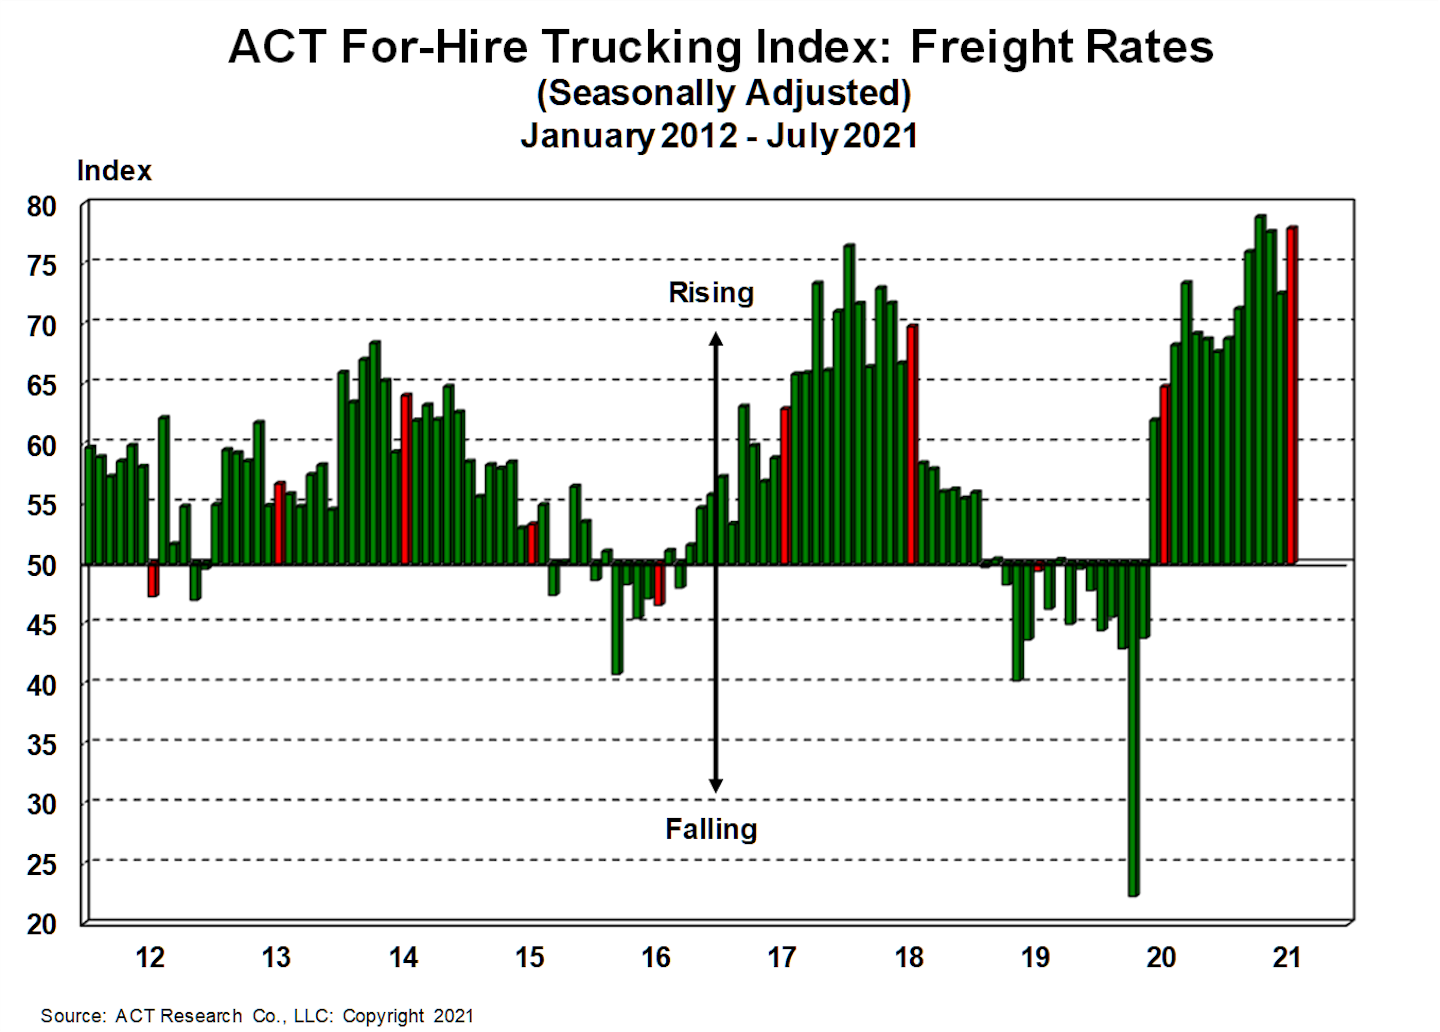 for-hire freight rates